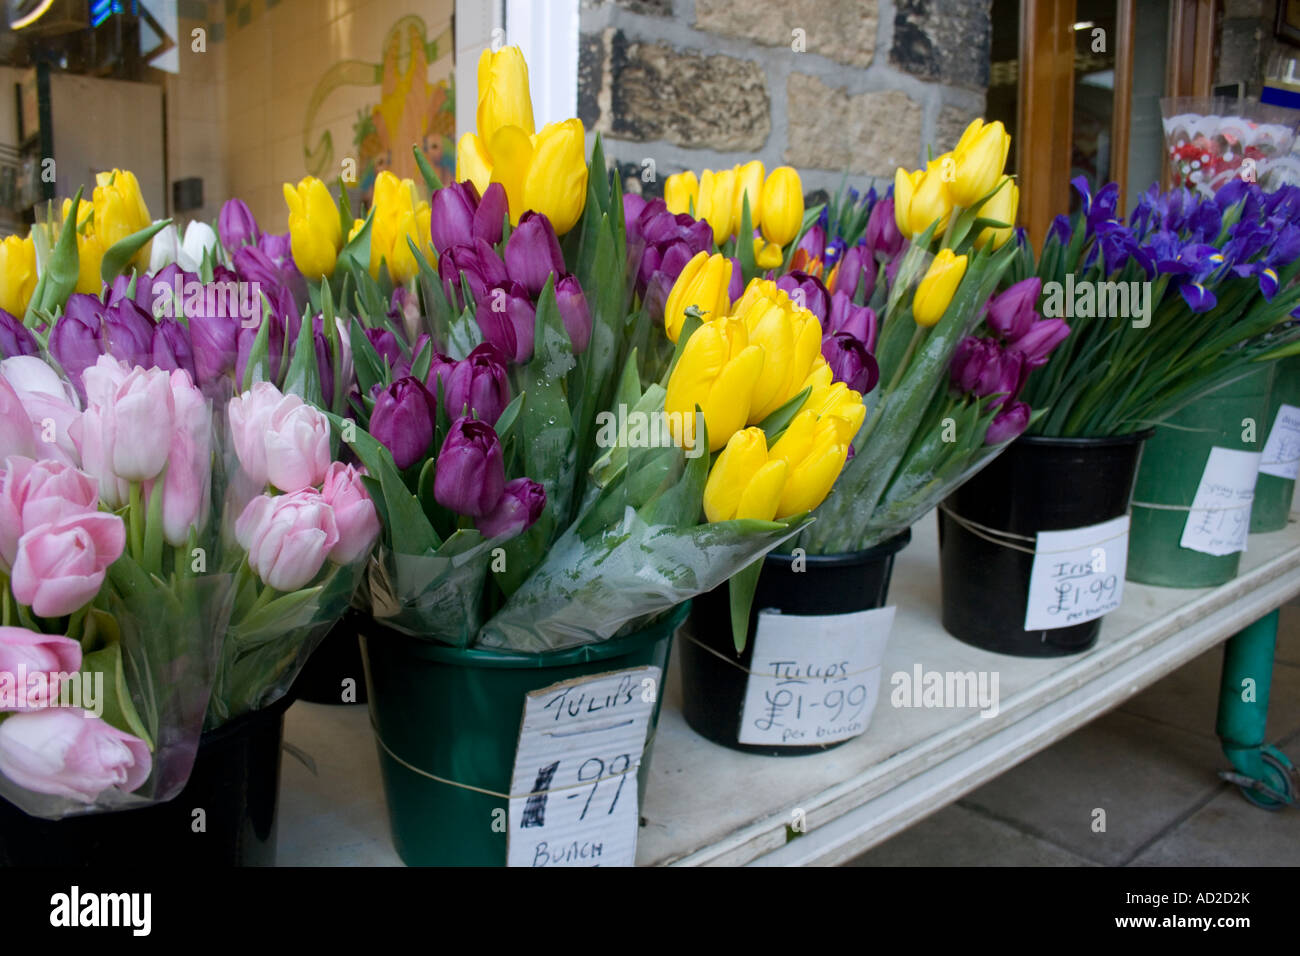 Tulips and Iris on sale outside grocers shop Stock Photo